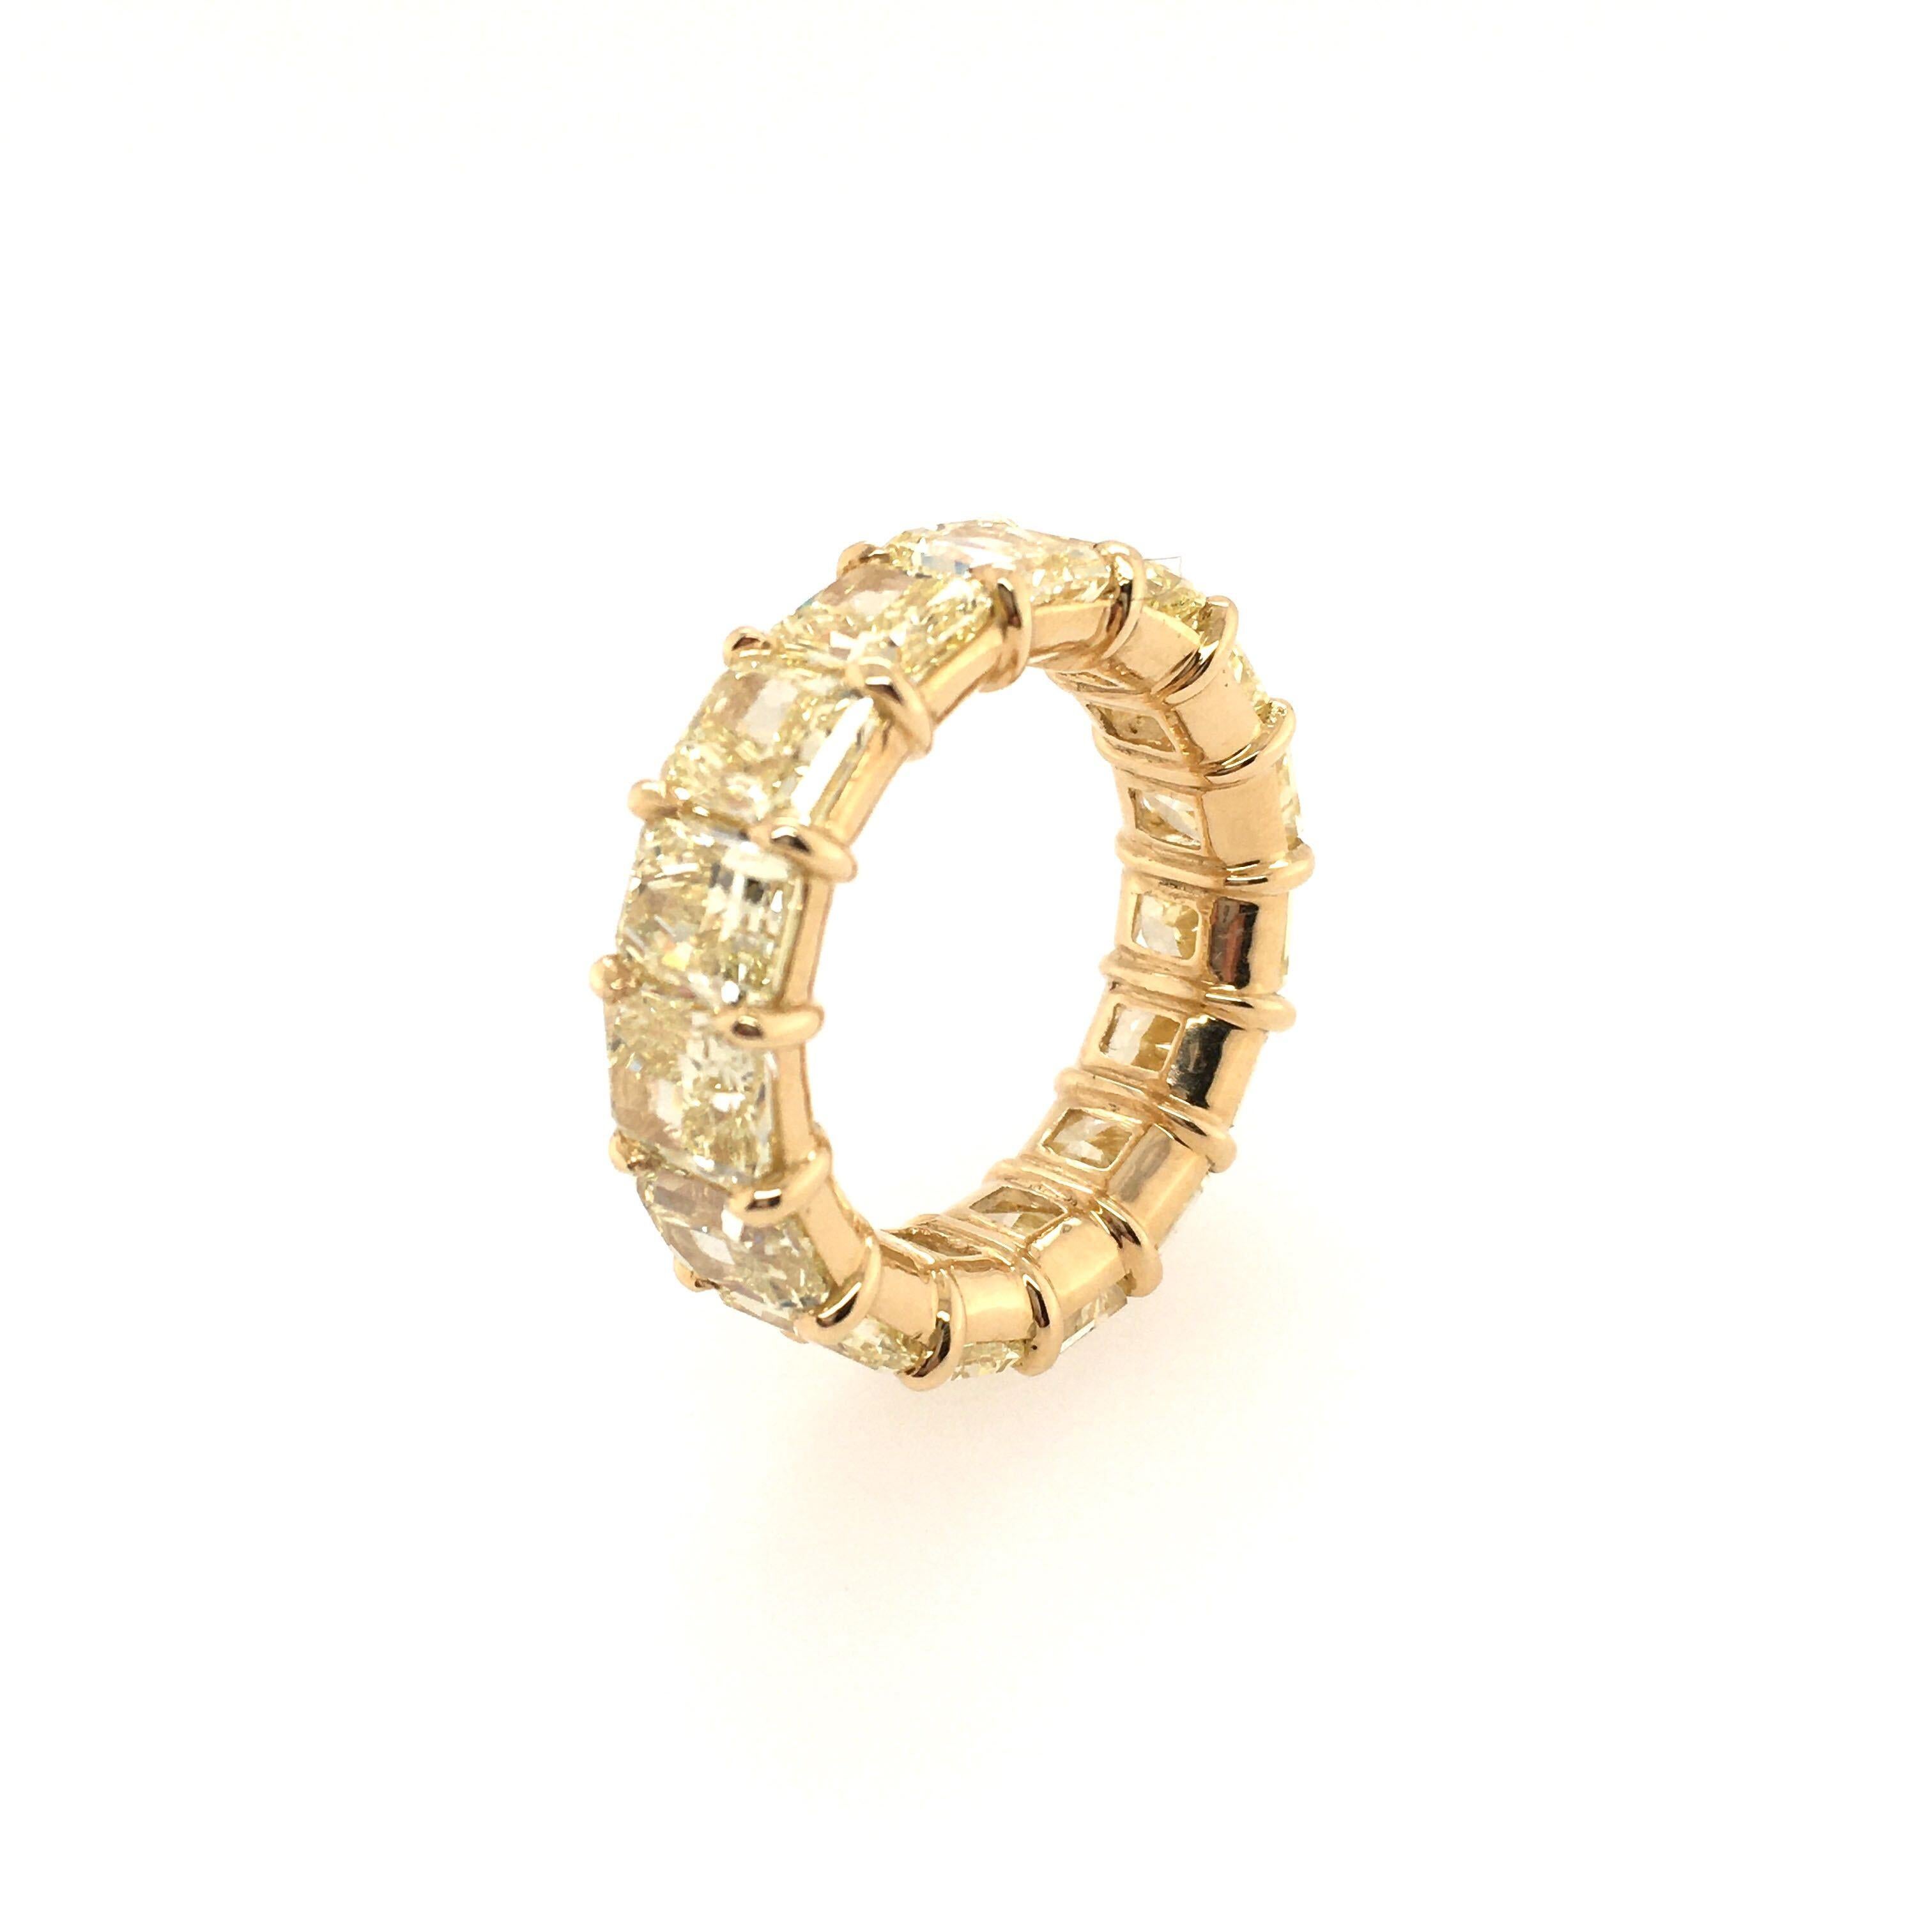 An 18 karat yellow gold and natural fancy yellow diamond eternity band. Of shared prong design, set with 15 cut-cornered rectangular modified brilliant cut natural fancy yellow diamonds, ranging in size from 0.66 to 0.89 carat. total diamond weight